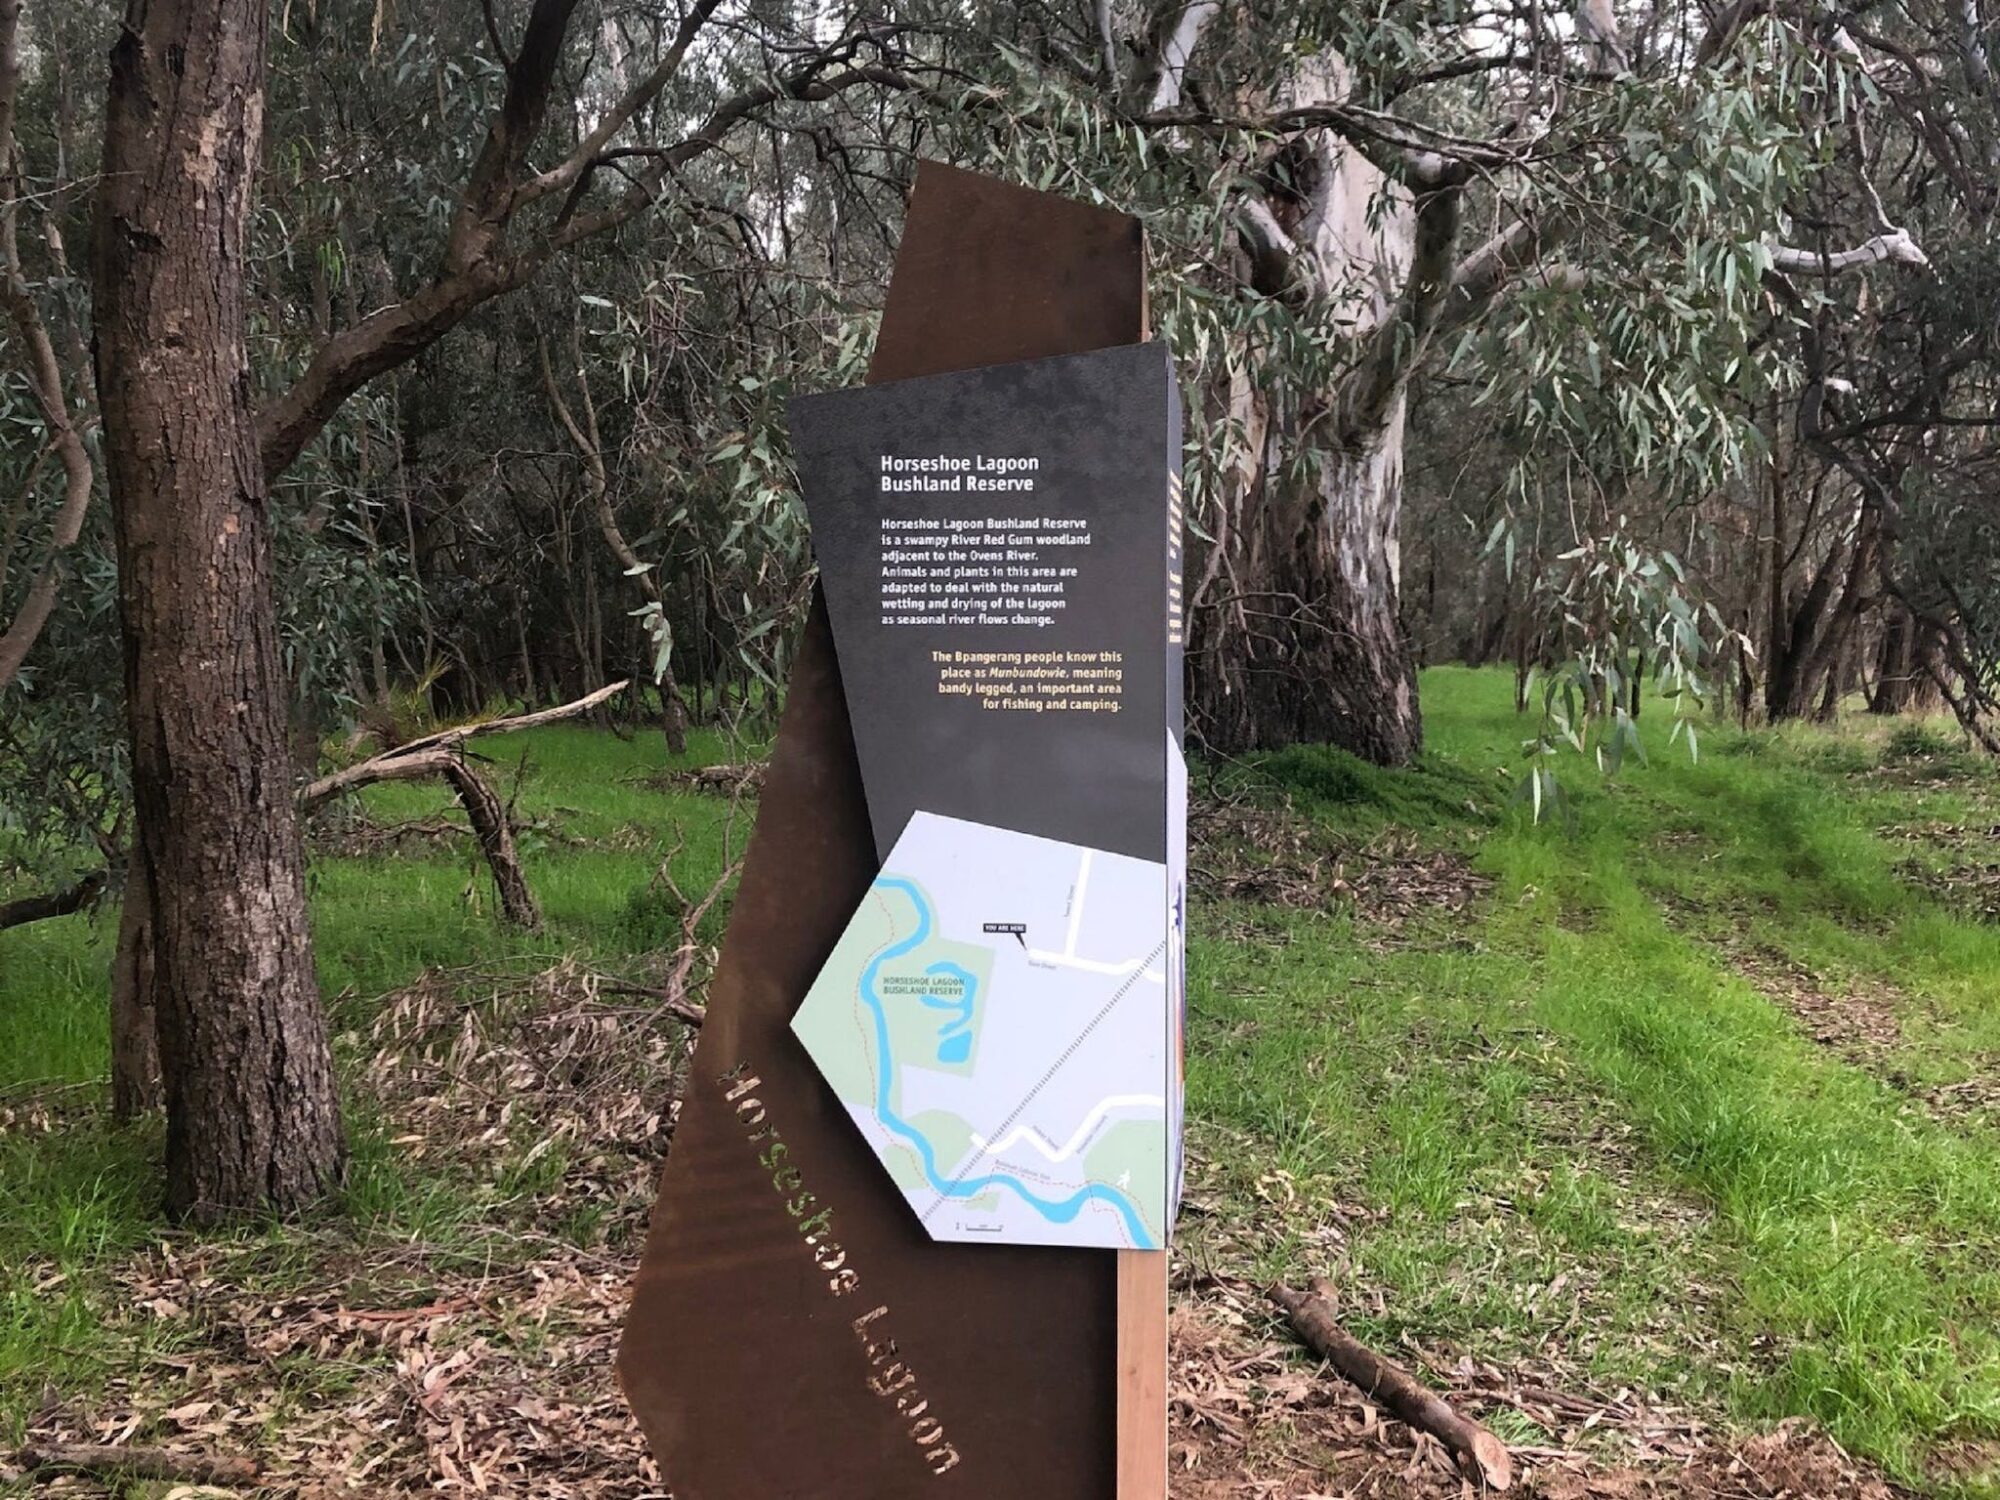 Directional sign showing map and giving information on the reserve, green grass, river red gums,